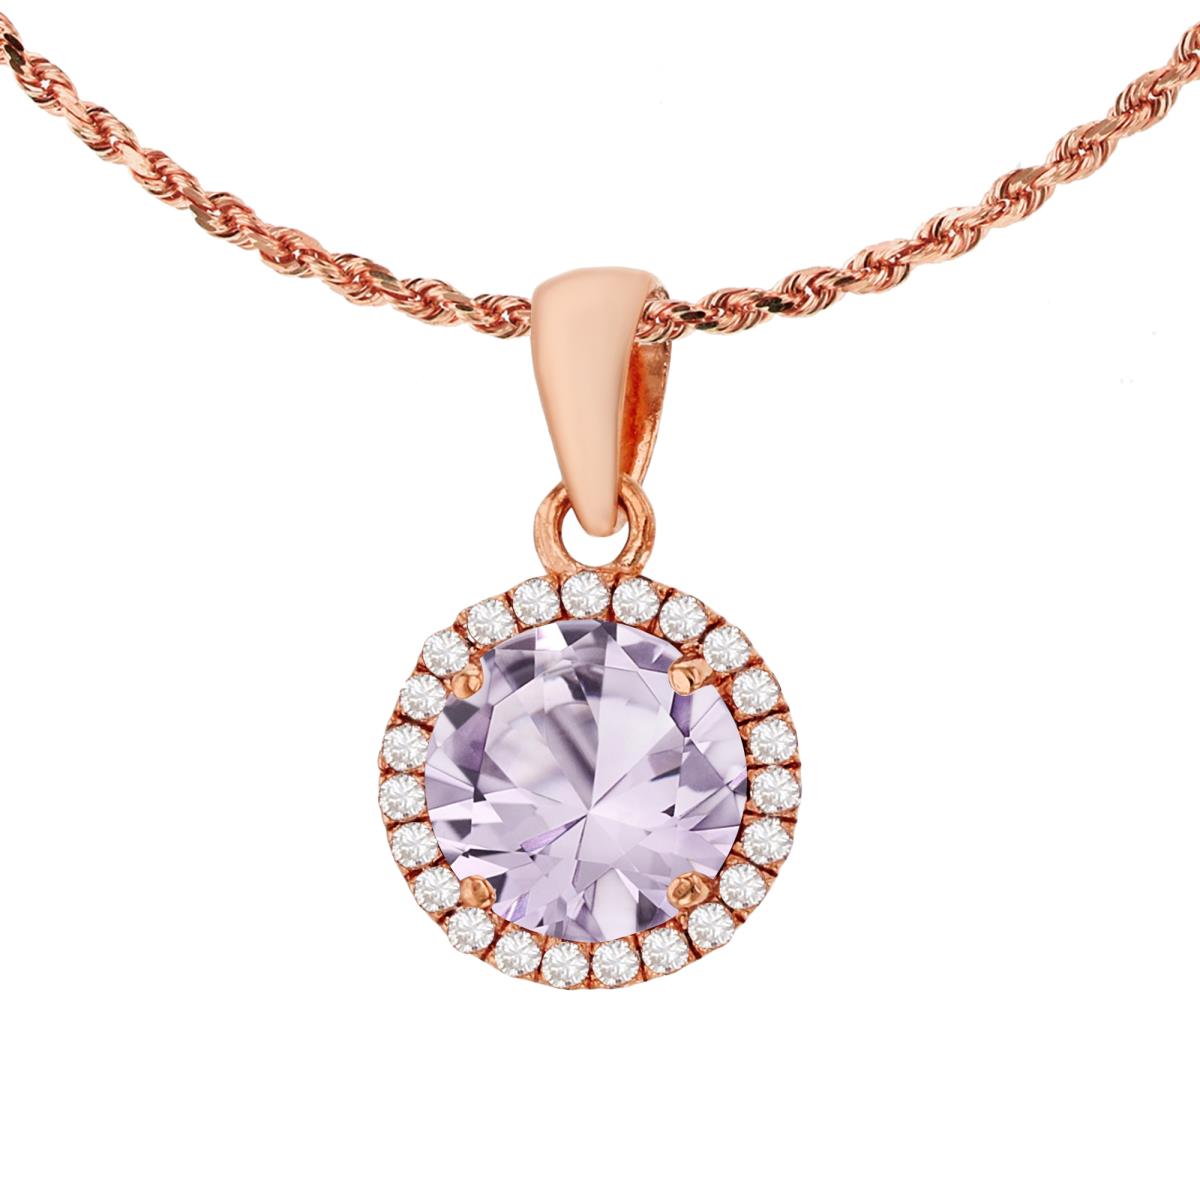 10K Rose Gold 7mm Round Rose De France & 0.12 CTTW Diamond Halo 18" Rope Chain Necklace